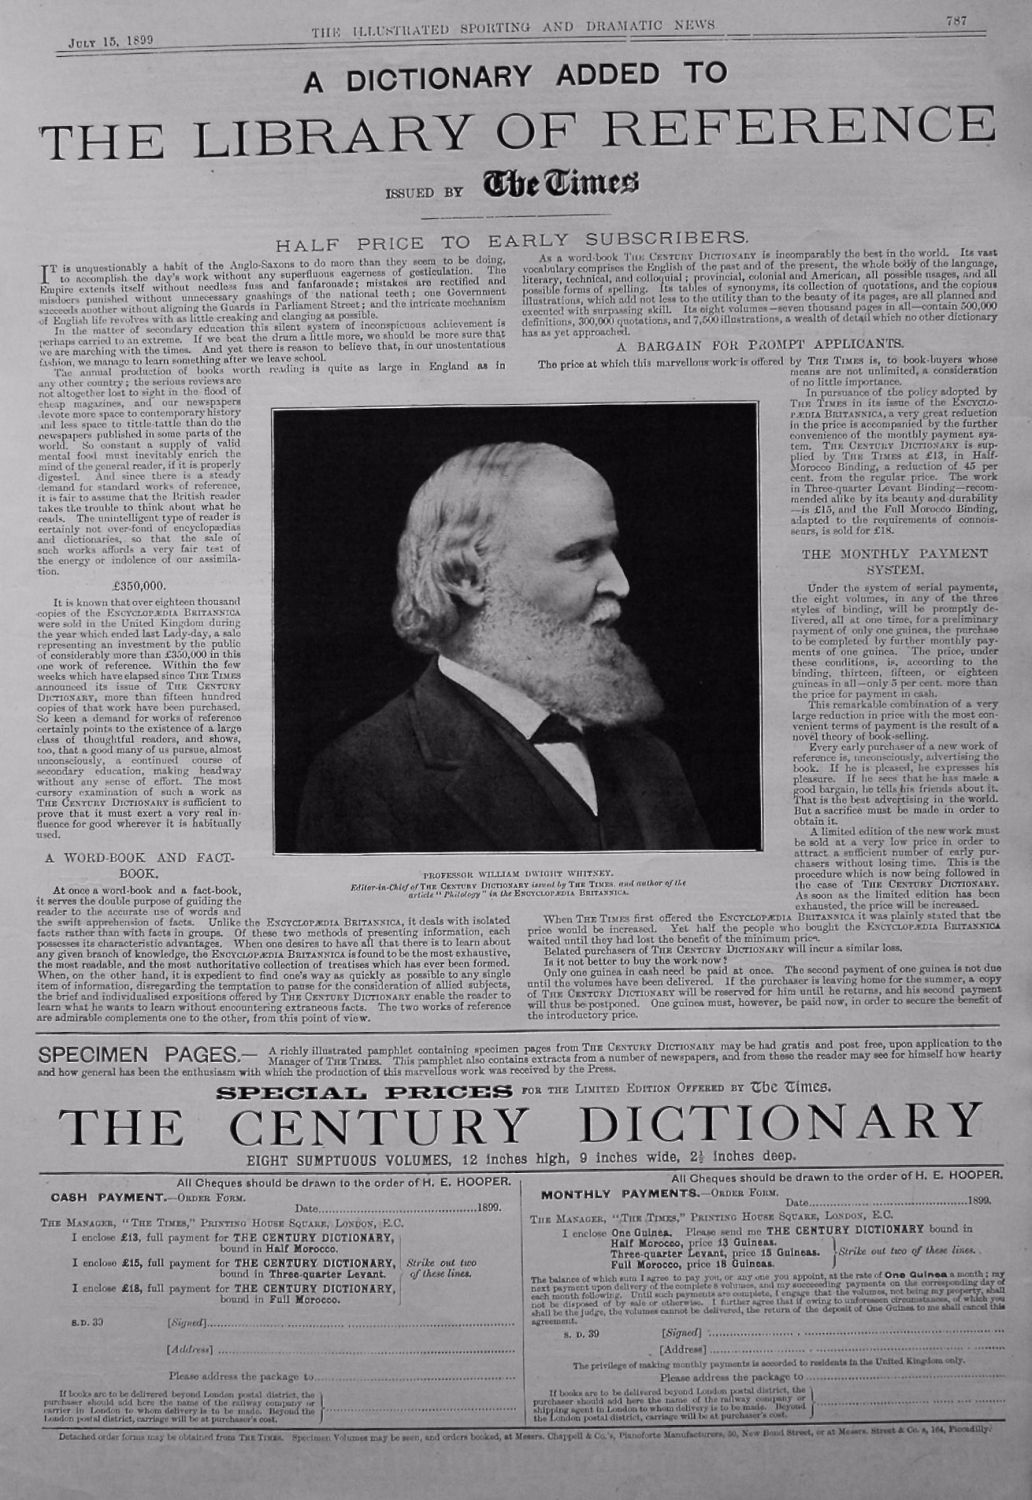 The Century Dictionary. Issued by The Times. 1899